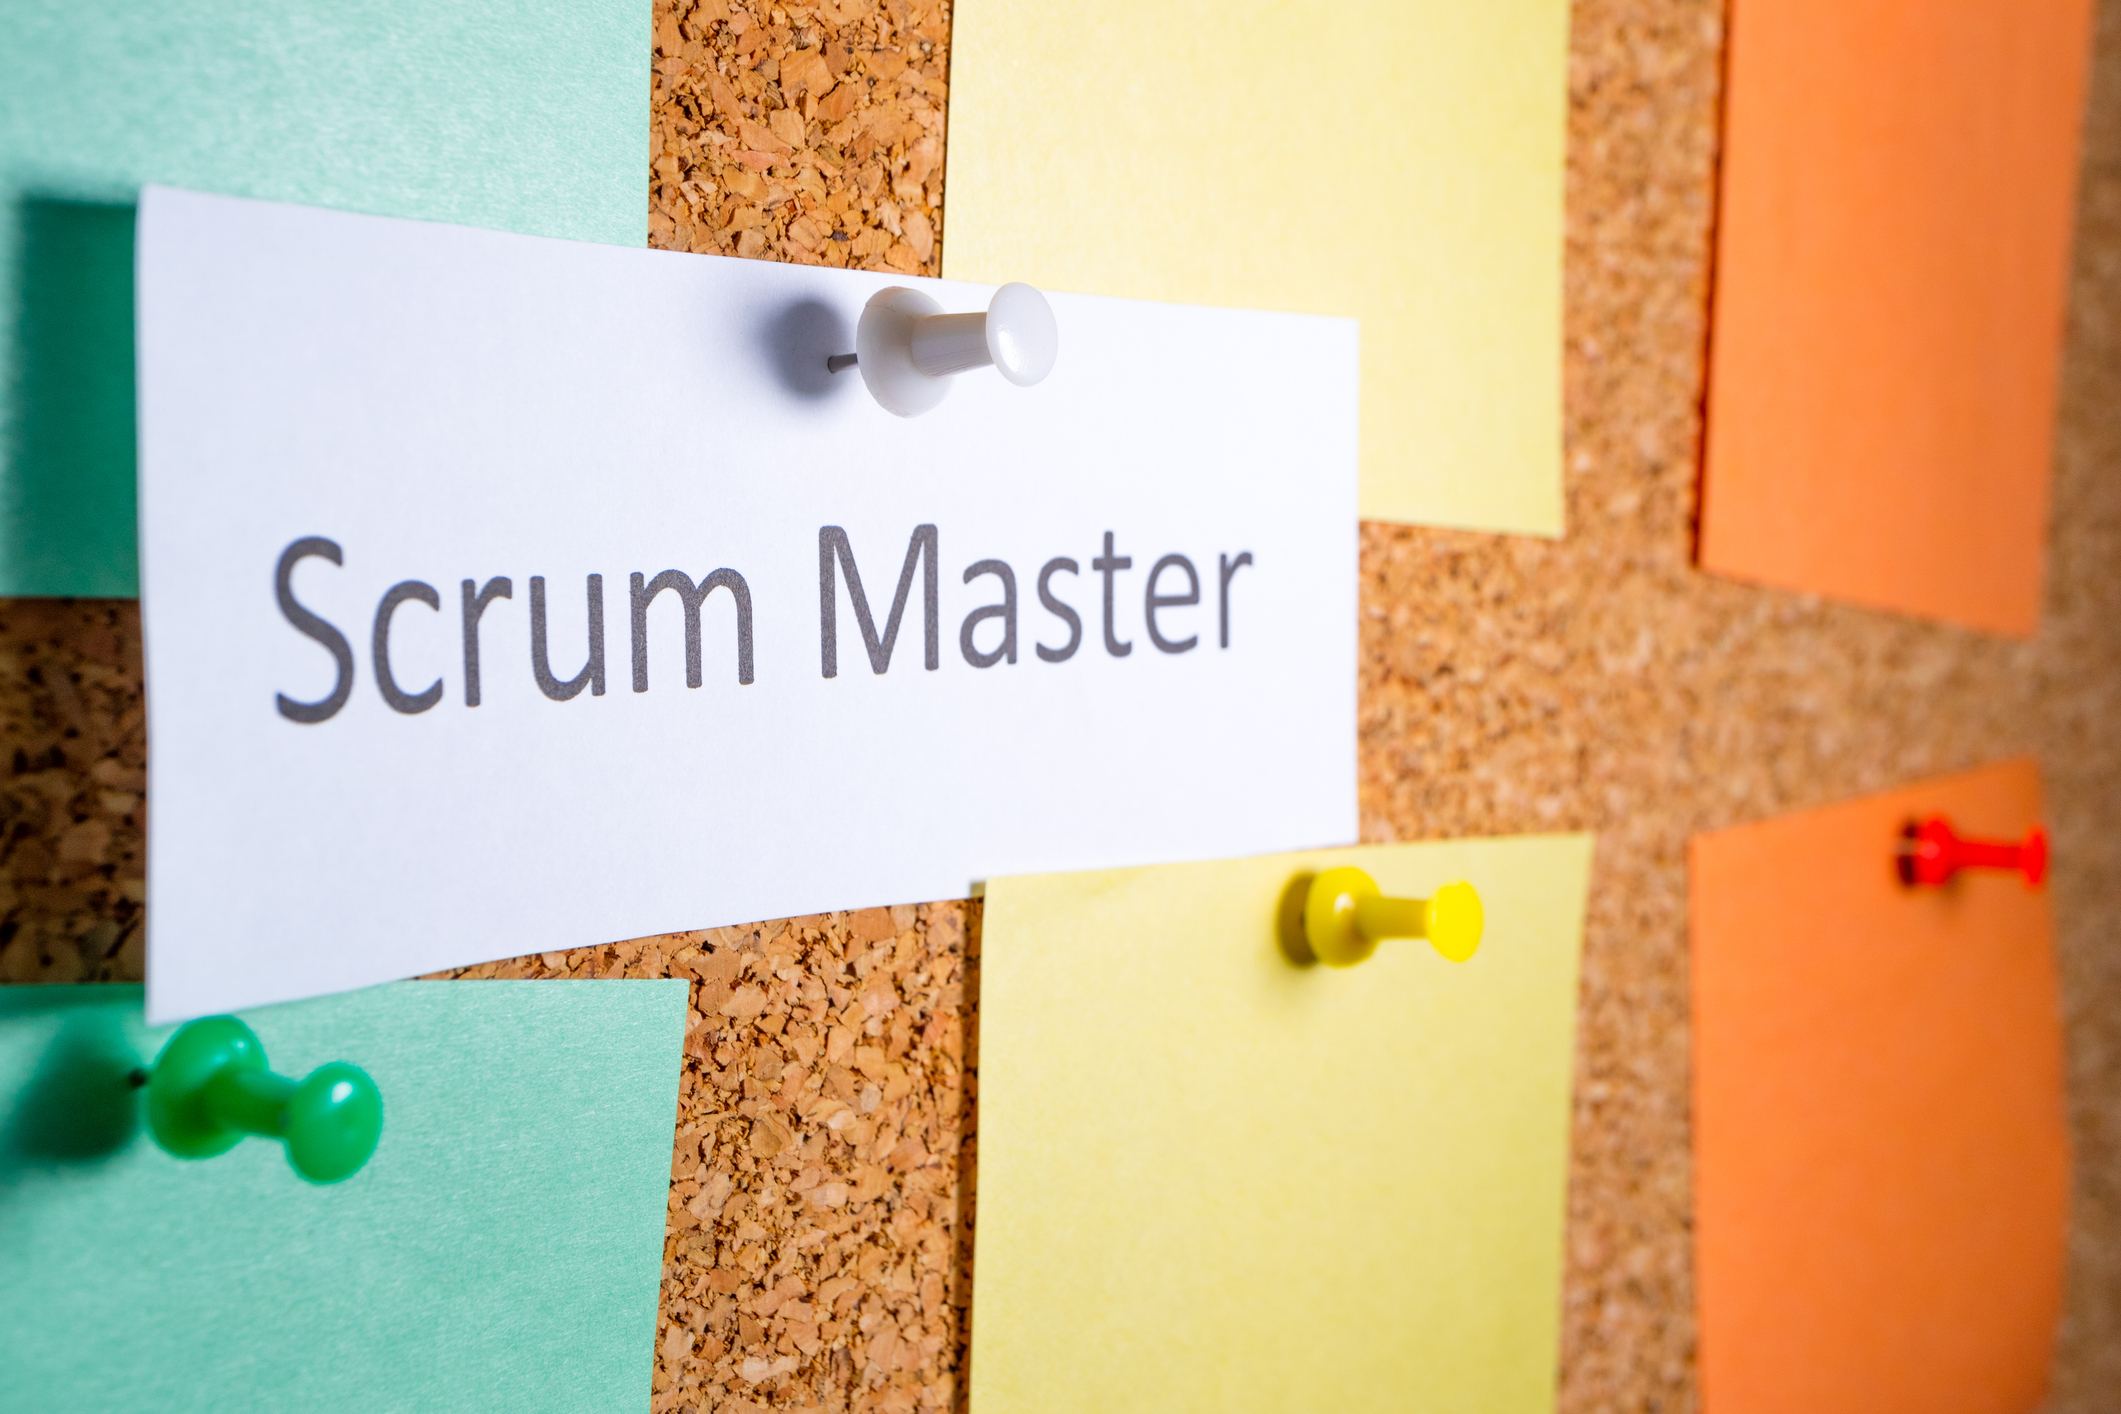 The New Scrum Guide